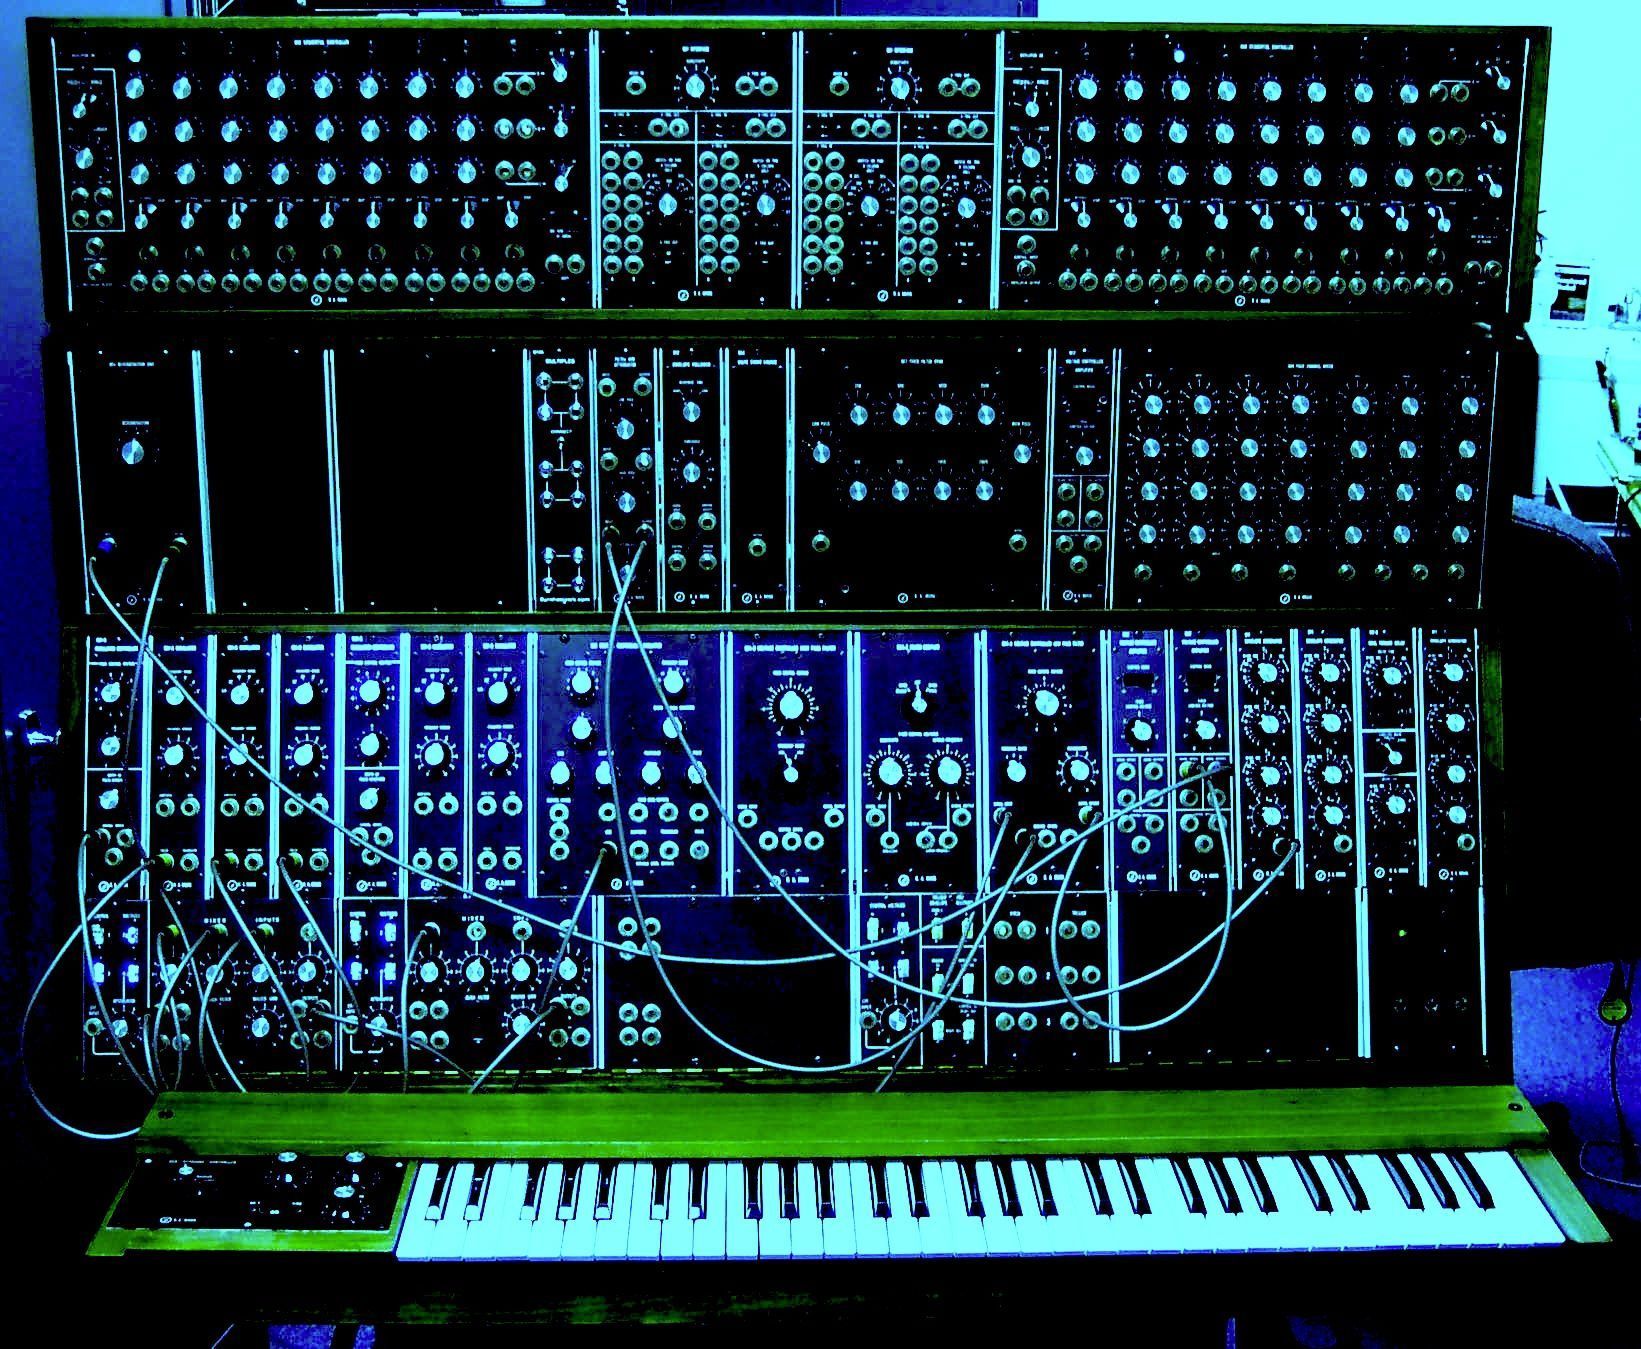 Synthesizer #Qjjr